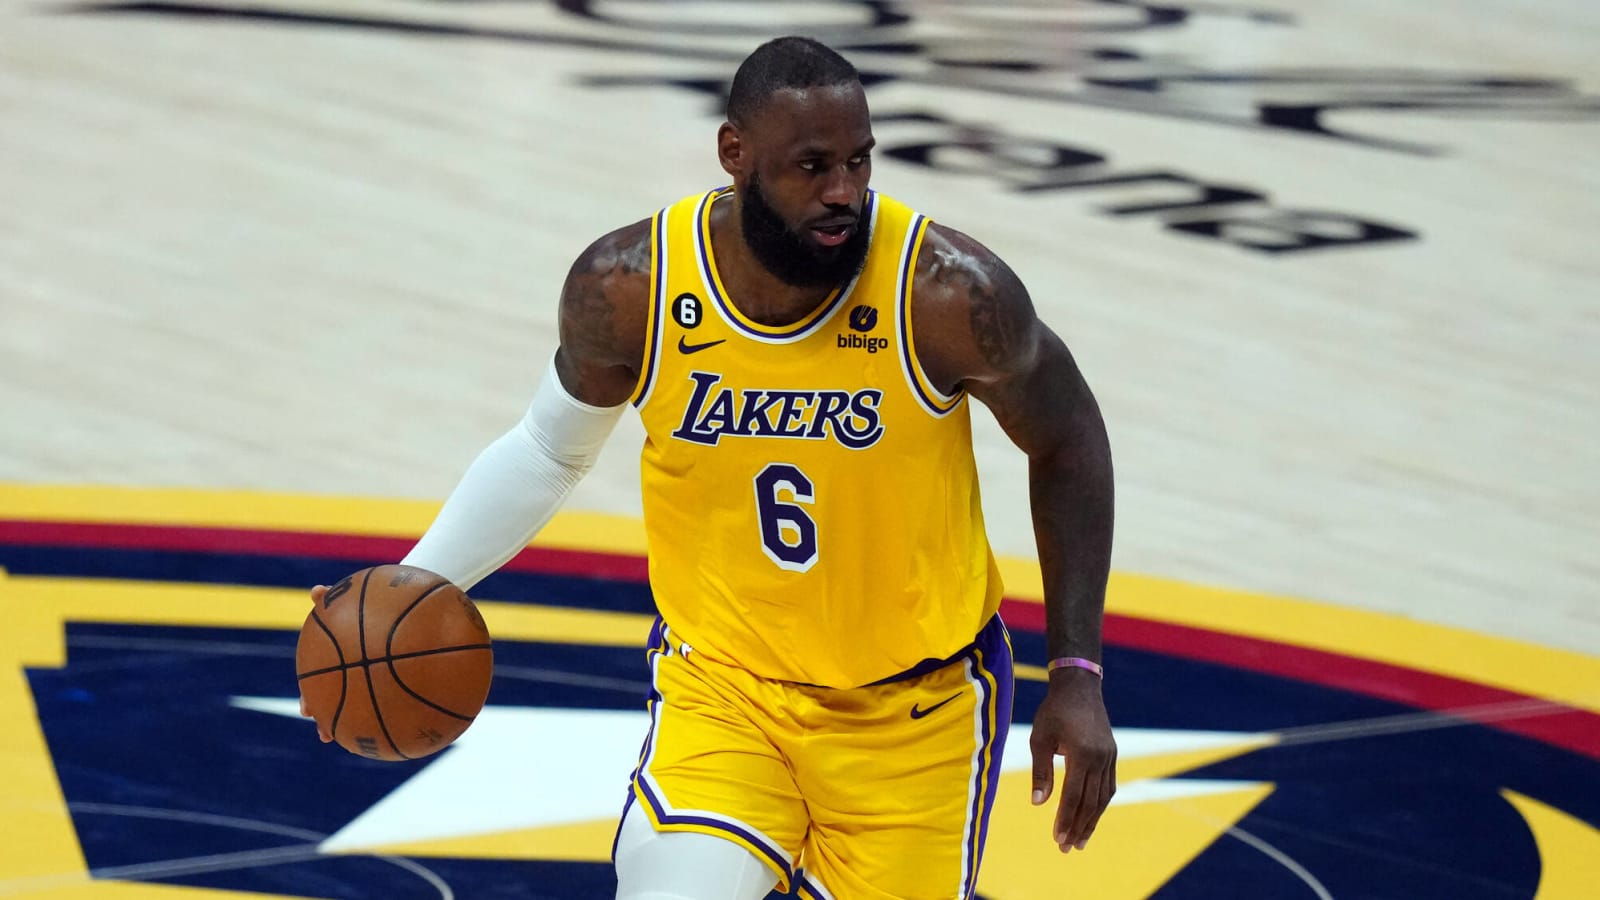 Lakers’ LeBron James makes bold statement after Game 2 loss